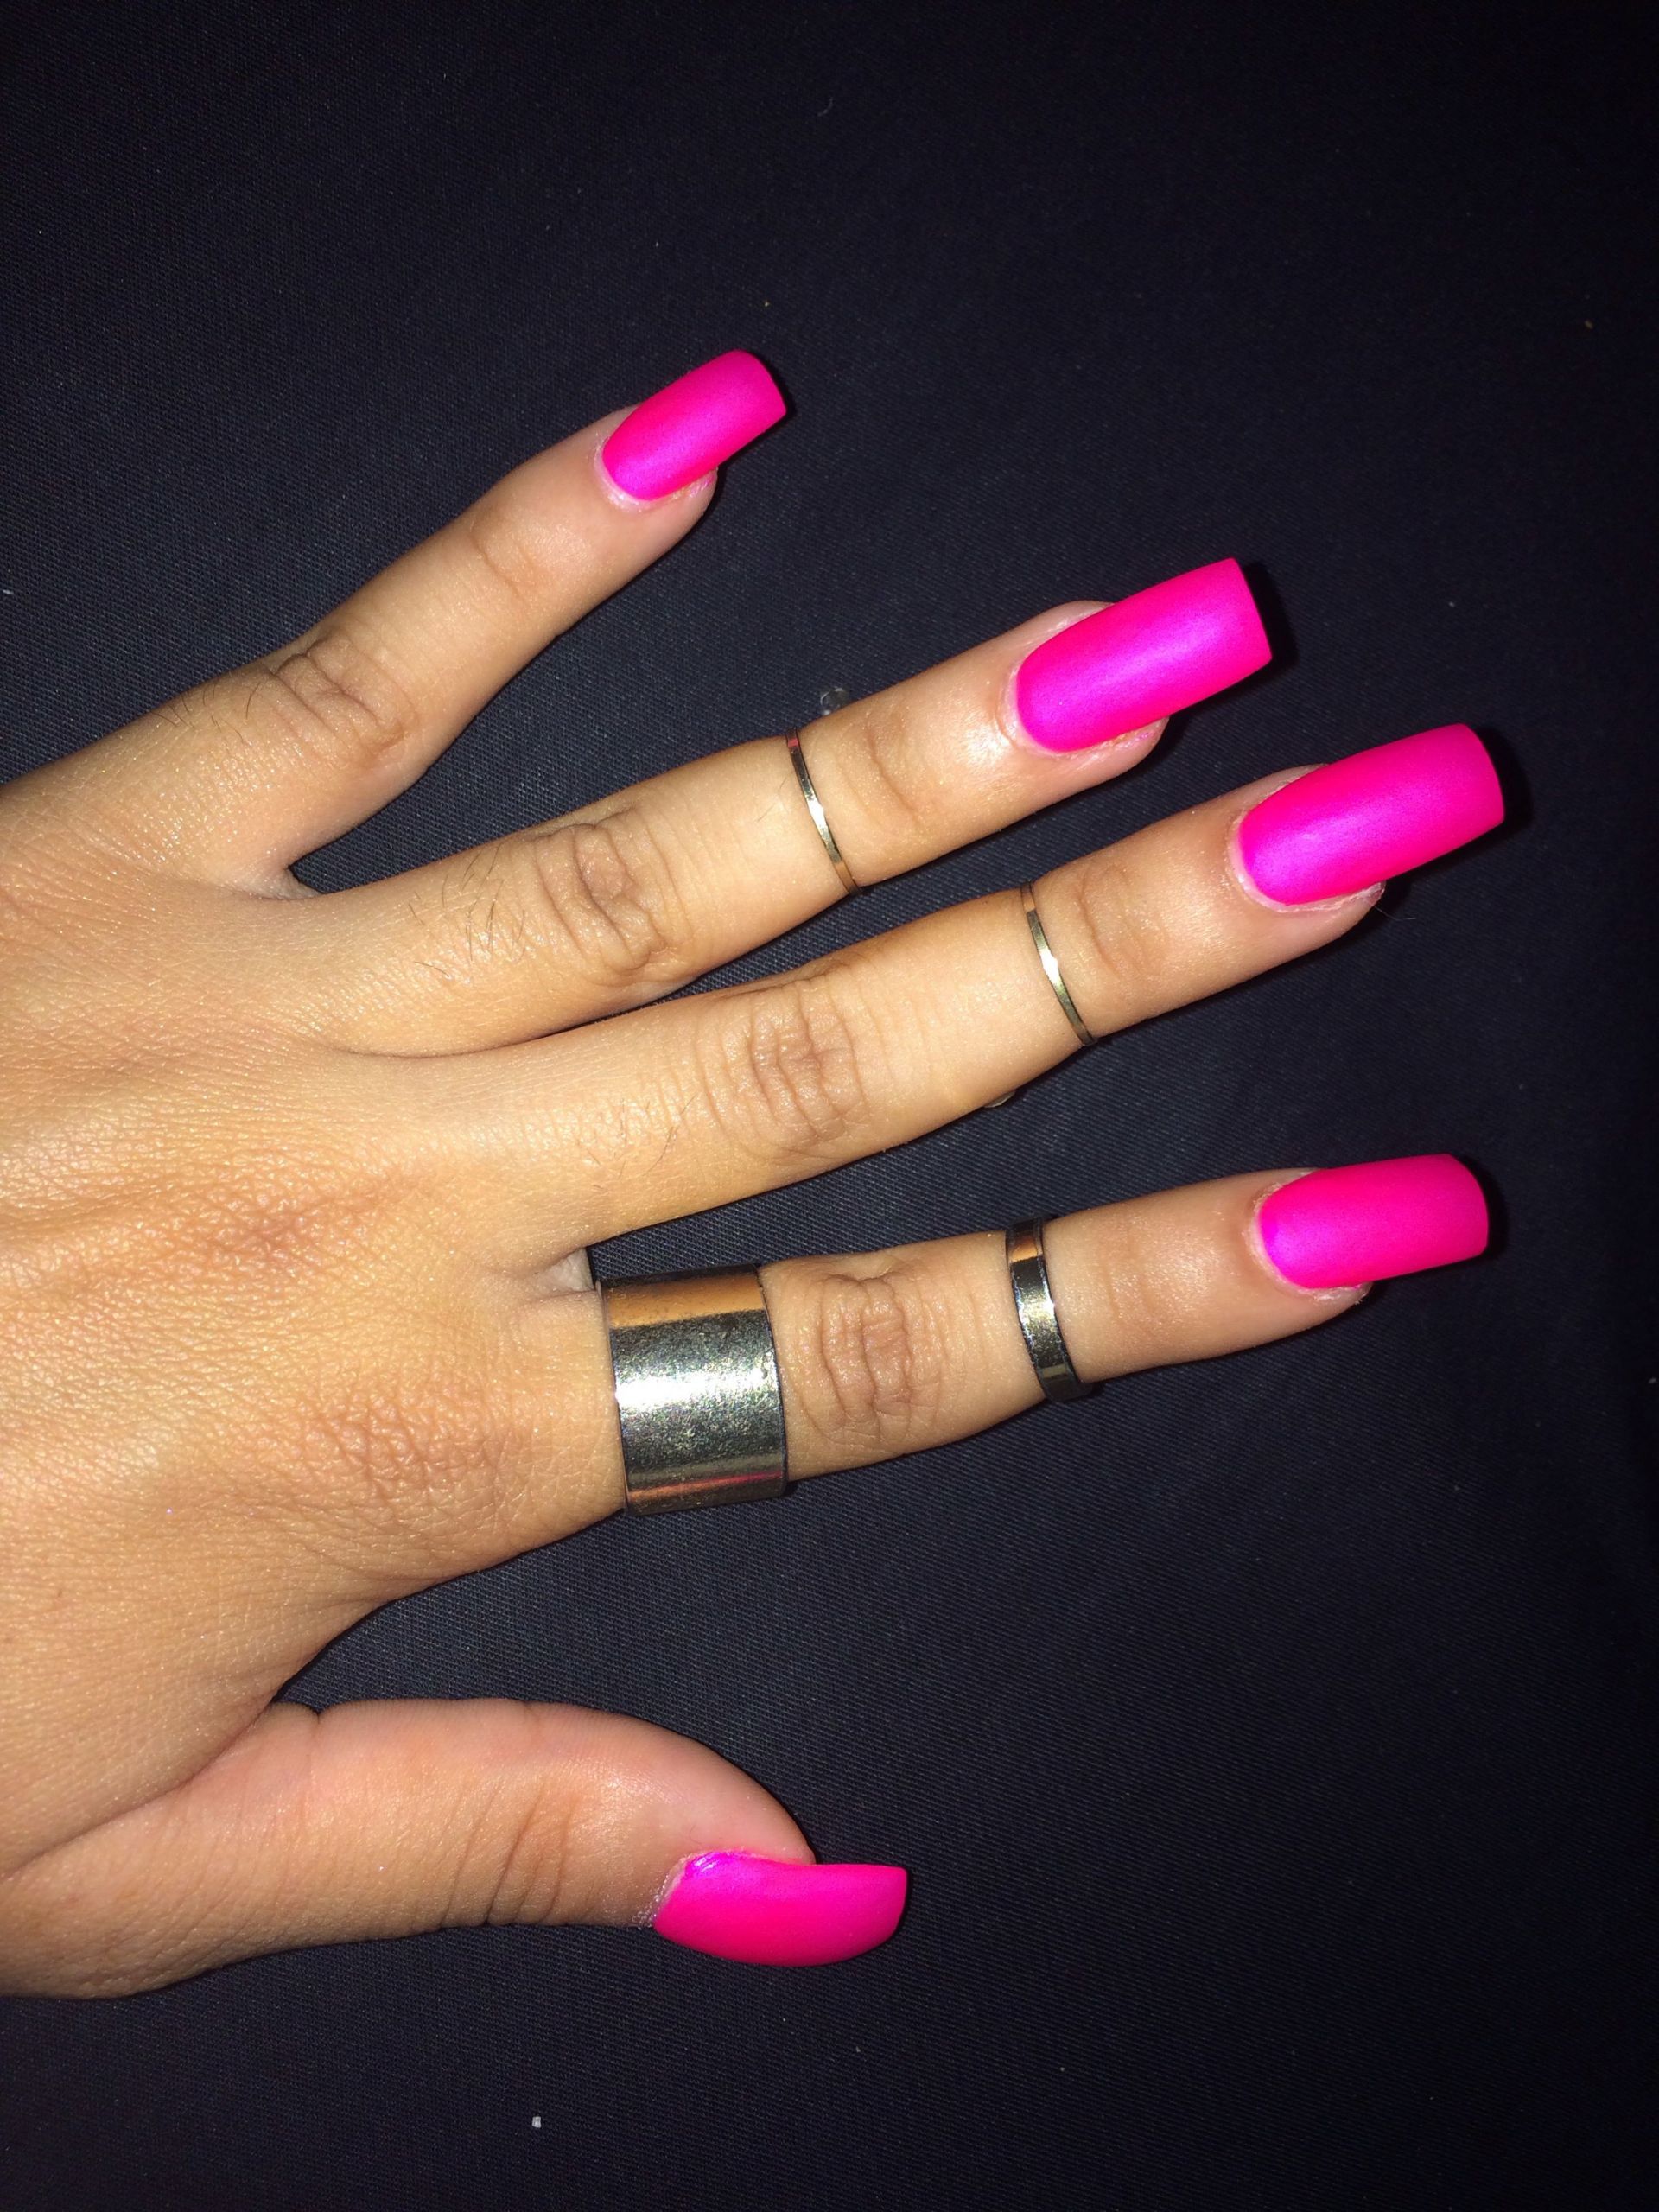 Acrylic Nail Colors For Summer
 Square acrylic nails Bright pink summer color with matte